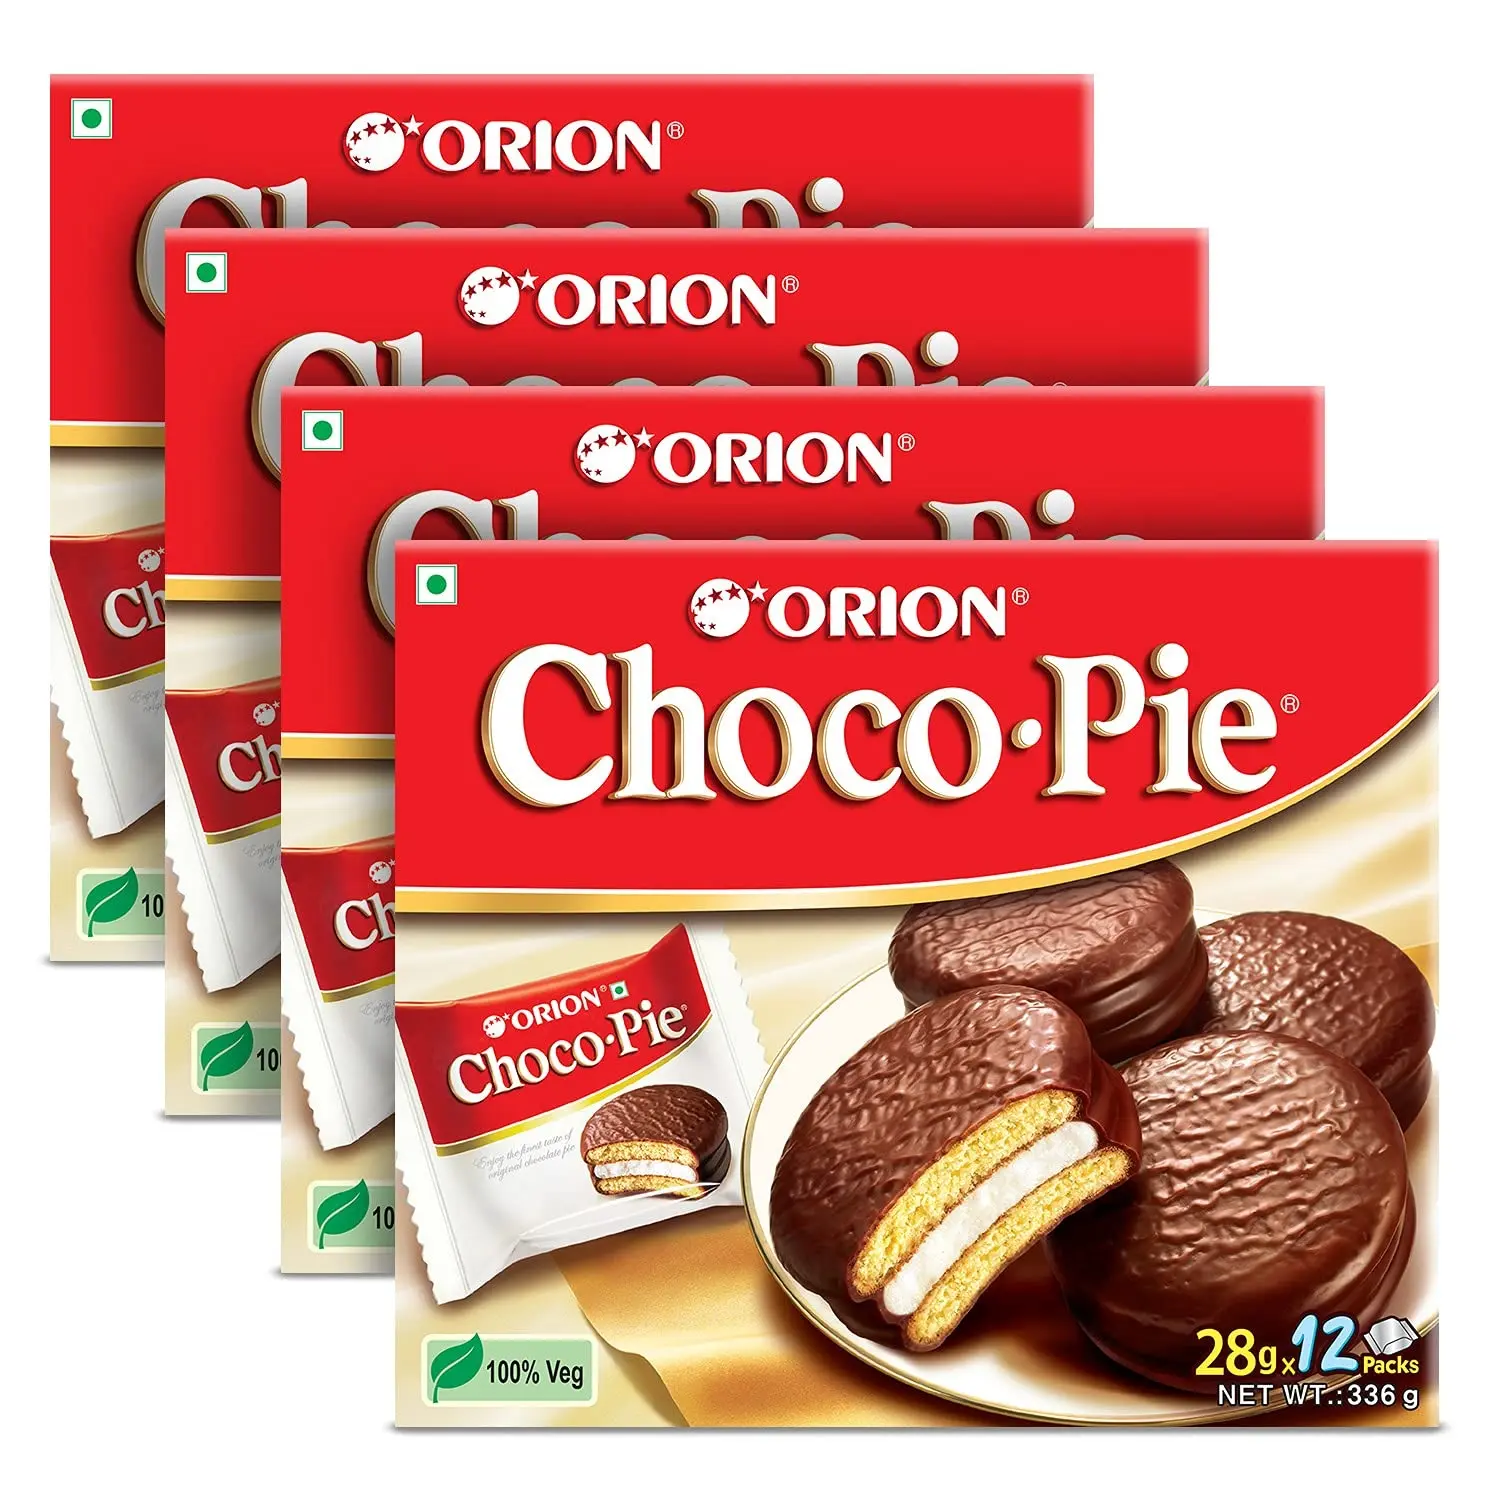 Top Quality ORION Choco Pie, Chocolate Coated Soft Biscuit At Best Price